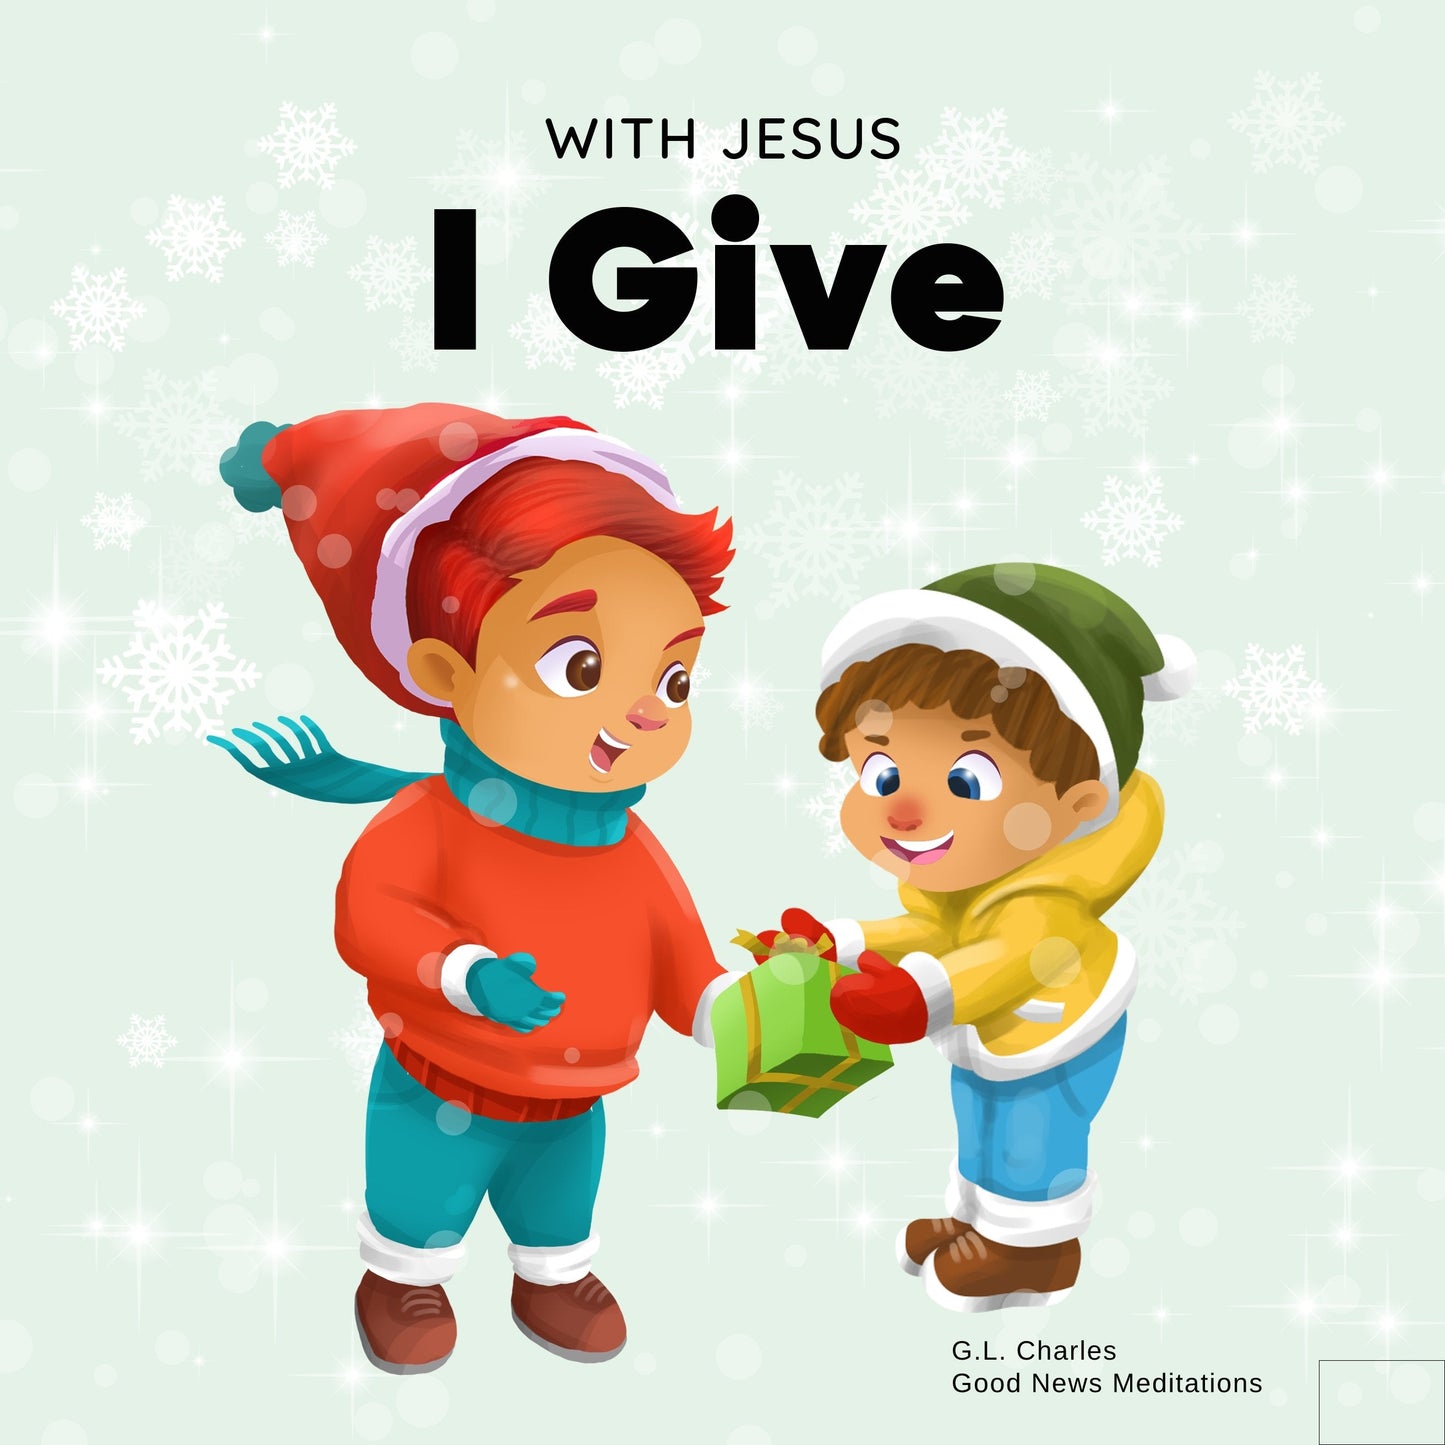 With Jesus I Give - Printed in the UK